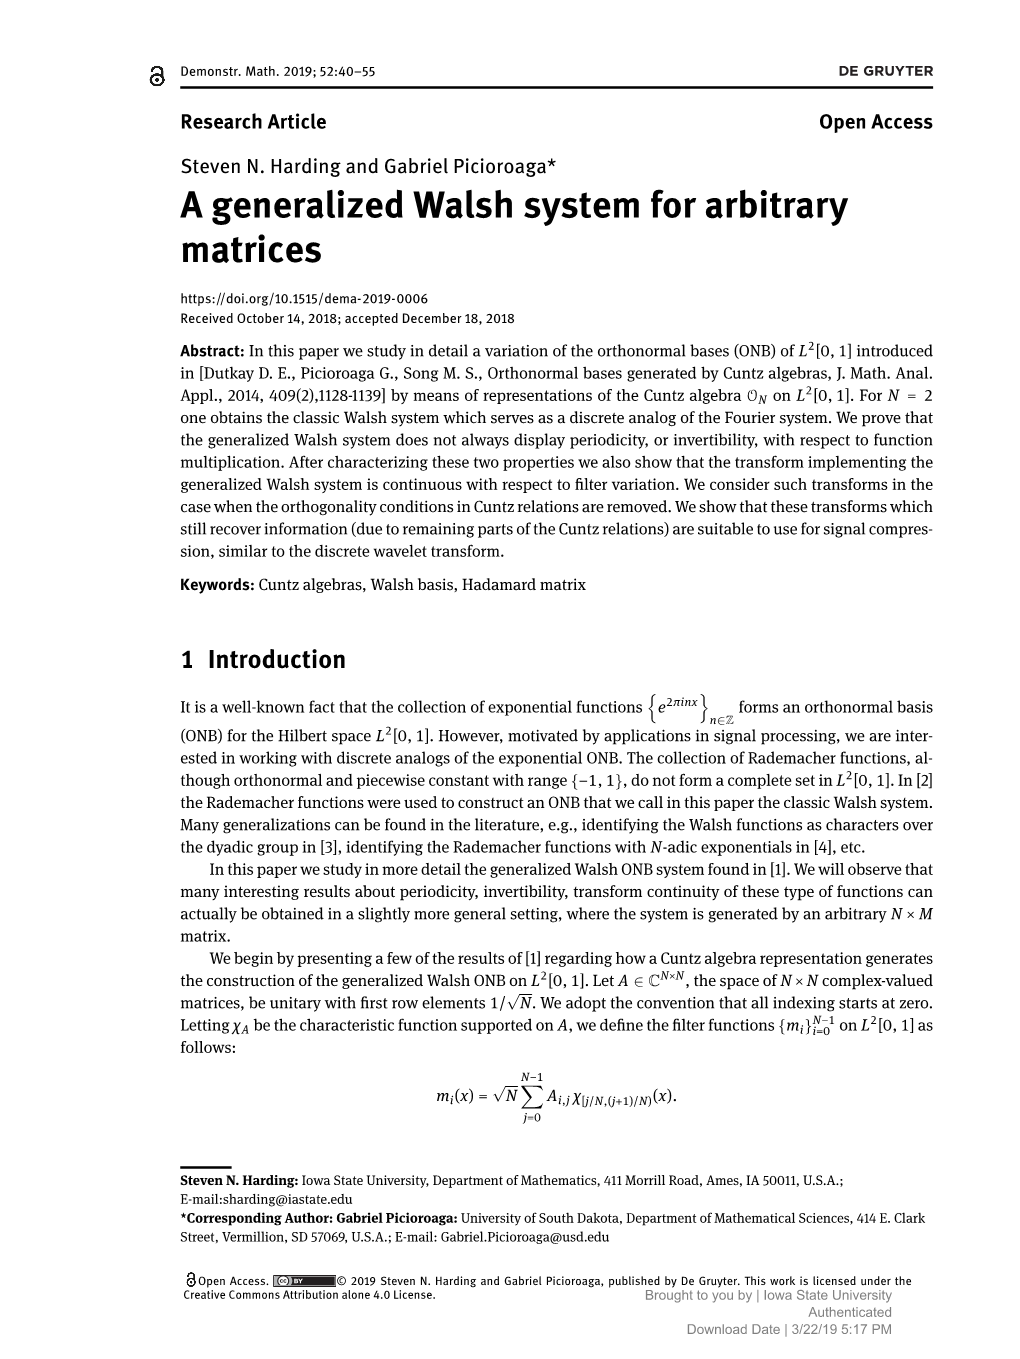 A Generalized Walsh System for Arbitrary Matrices Received October 14, 2018; Accepted December 18, 2018